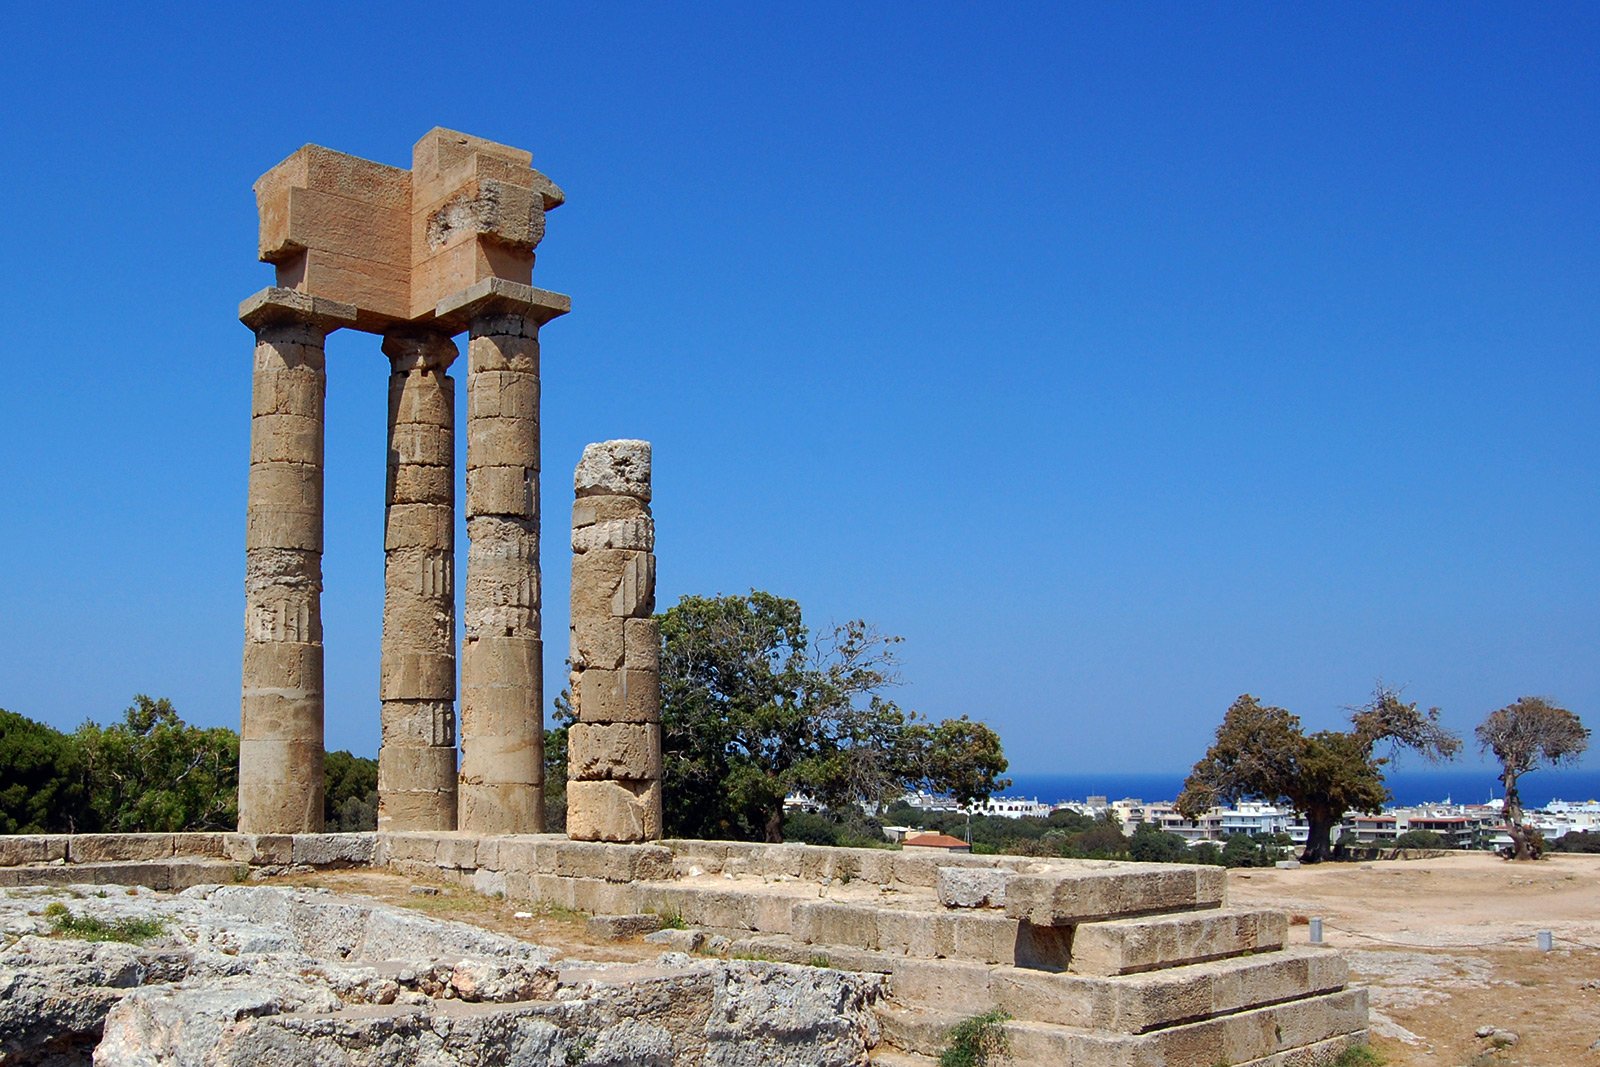 How to see the Acropolis of Rhodes on Rhodes